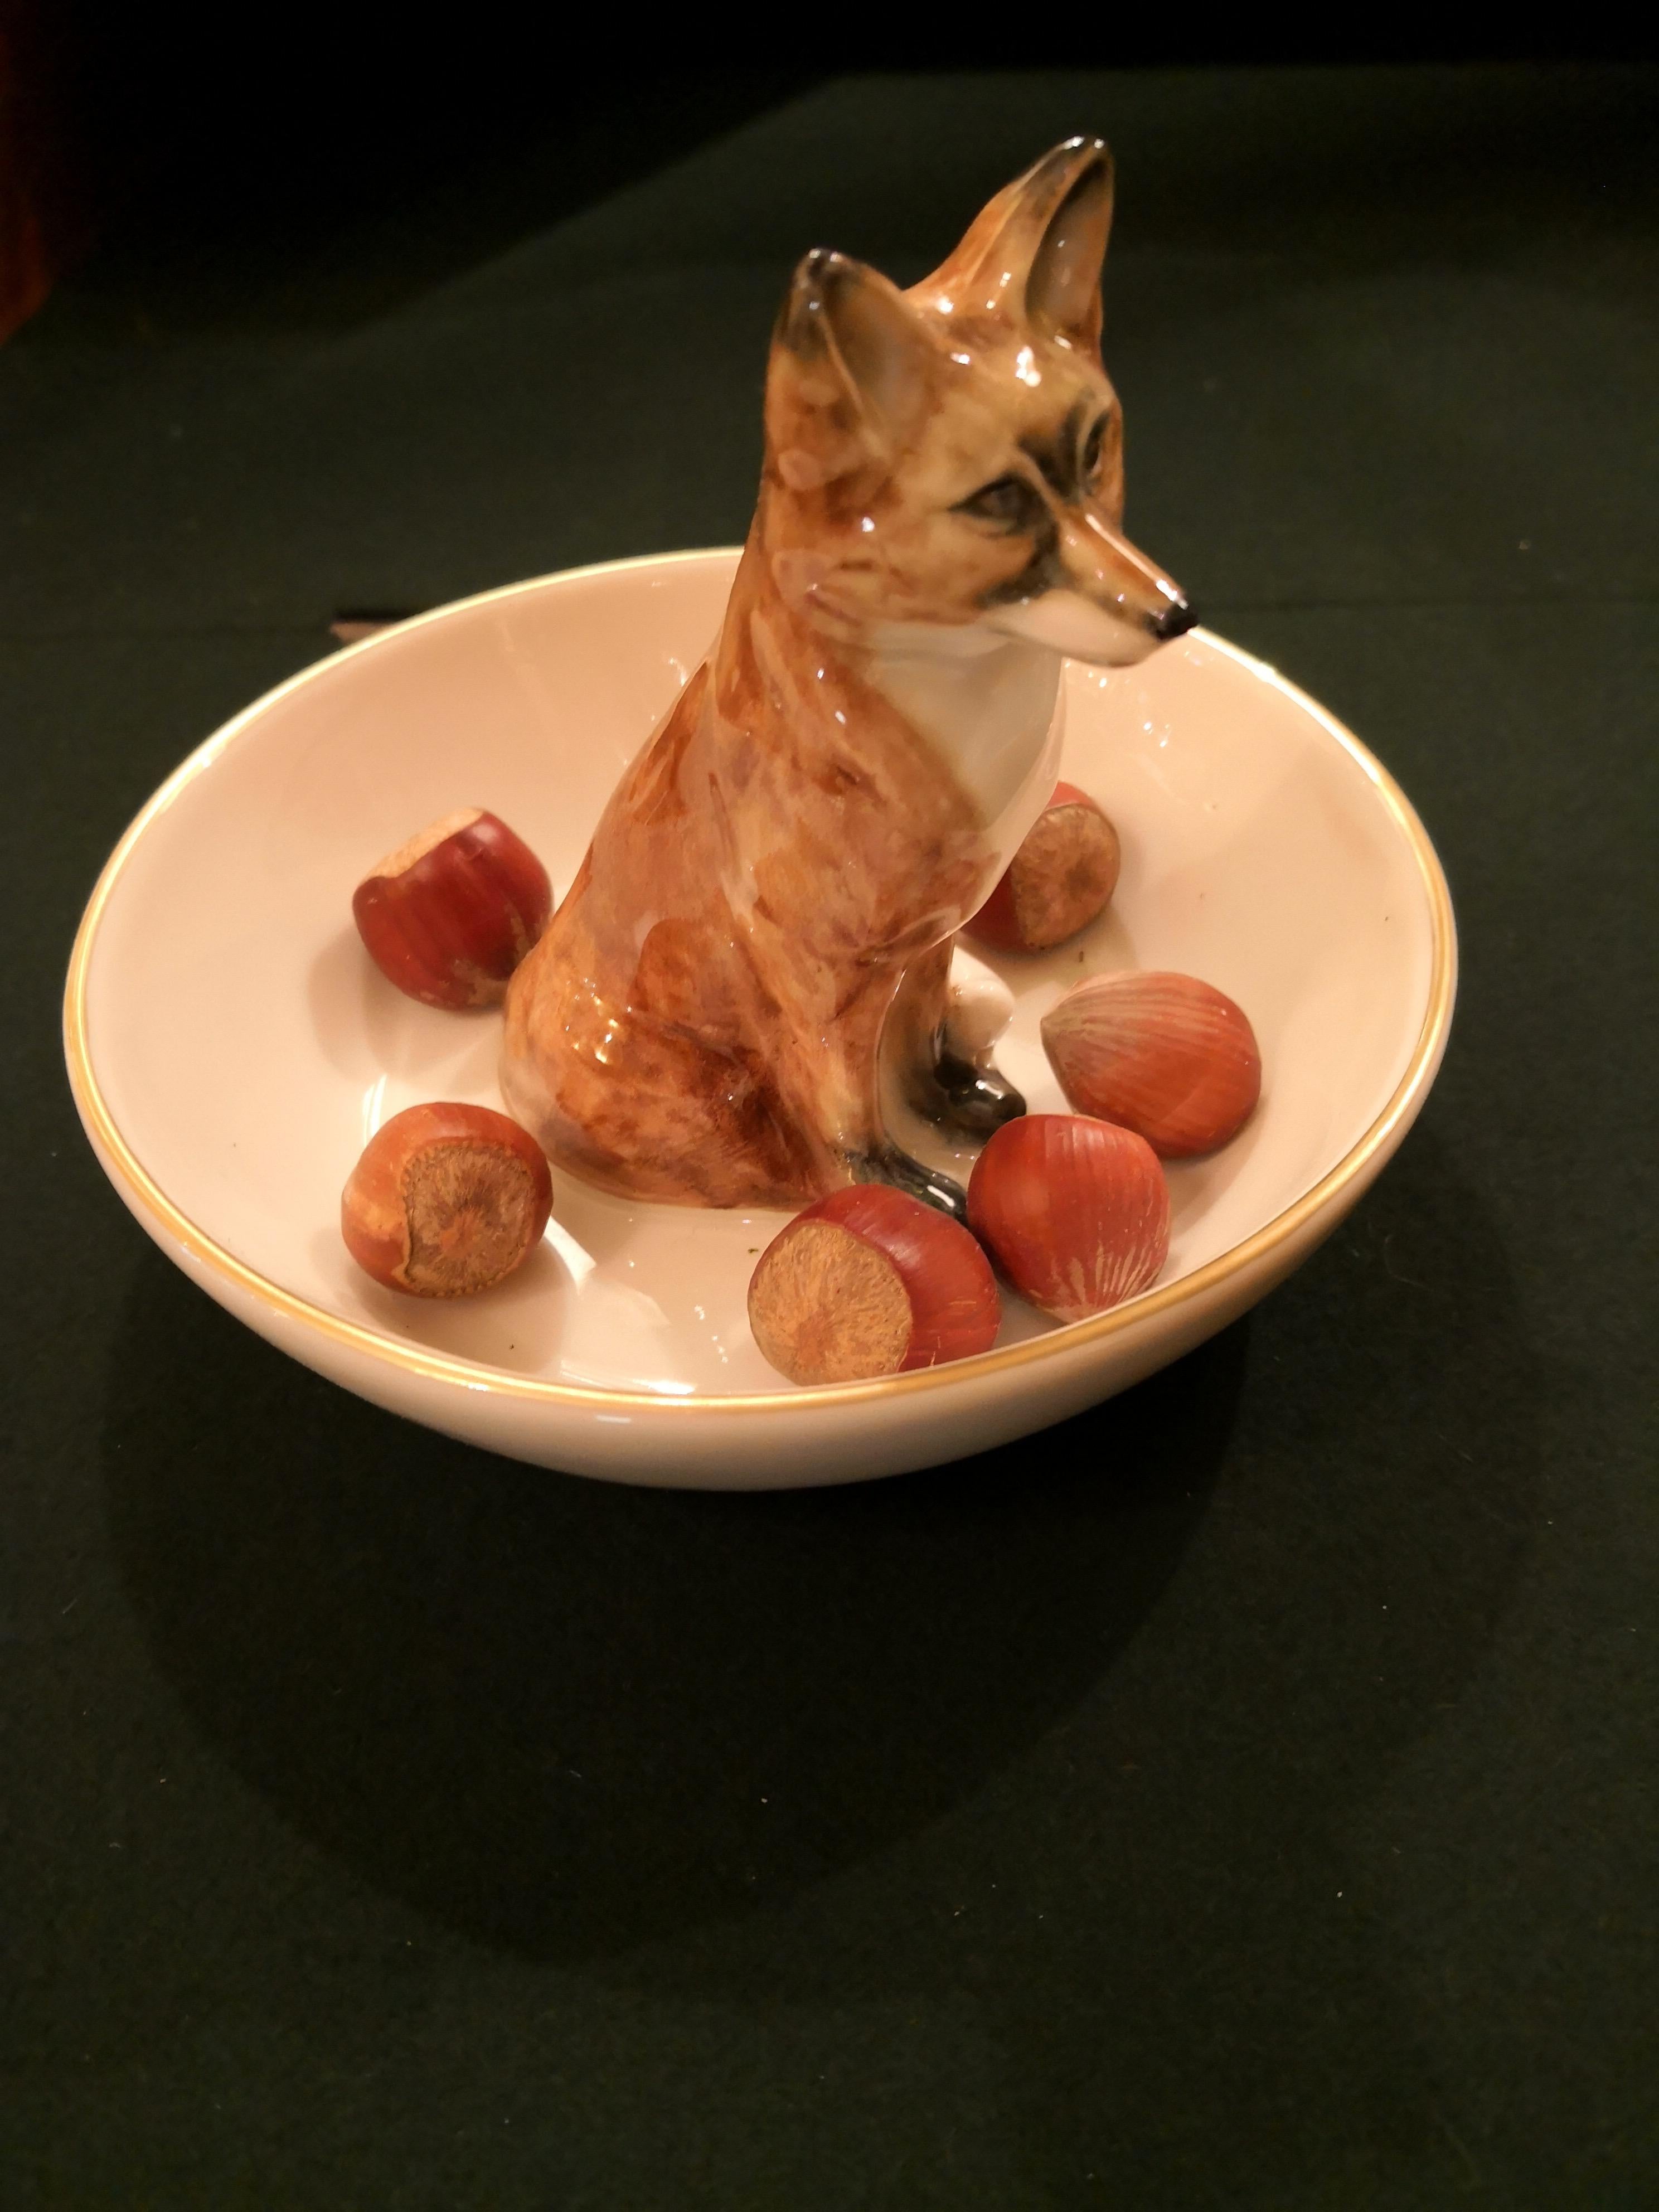 Completely handmade porcelain bowl with a hands-free naturalistic painted fox in brown colors. The fox is sitting in the middle of the bowl for decorating nuts or sweets around the fox figure. Rimmed with a fine 24 carat gold line. Handmade in